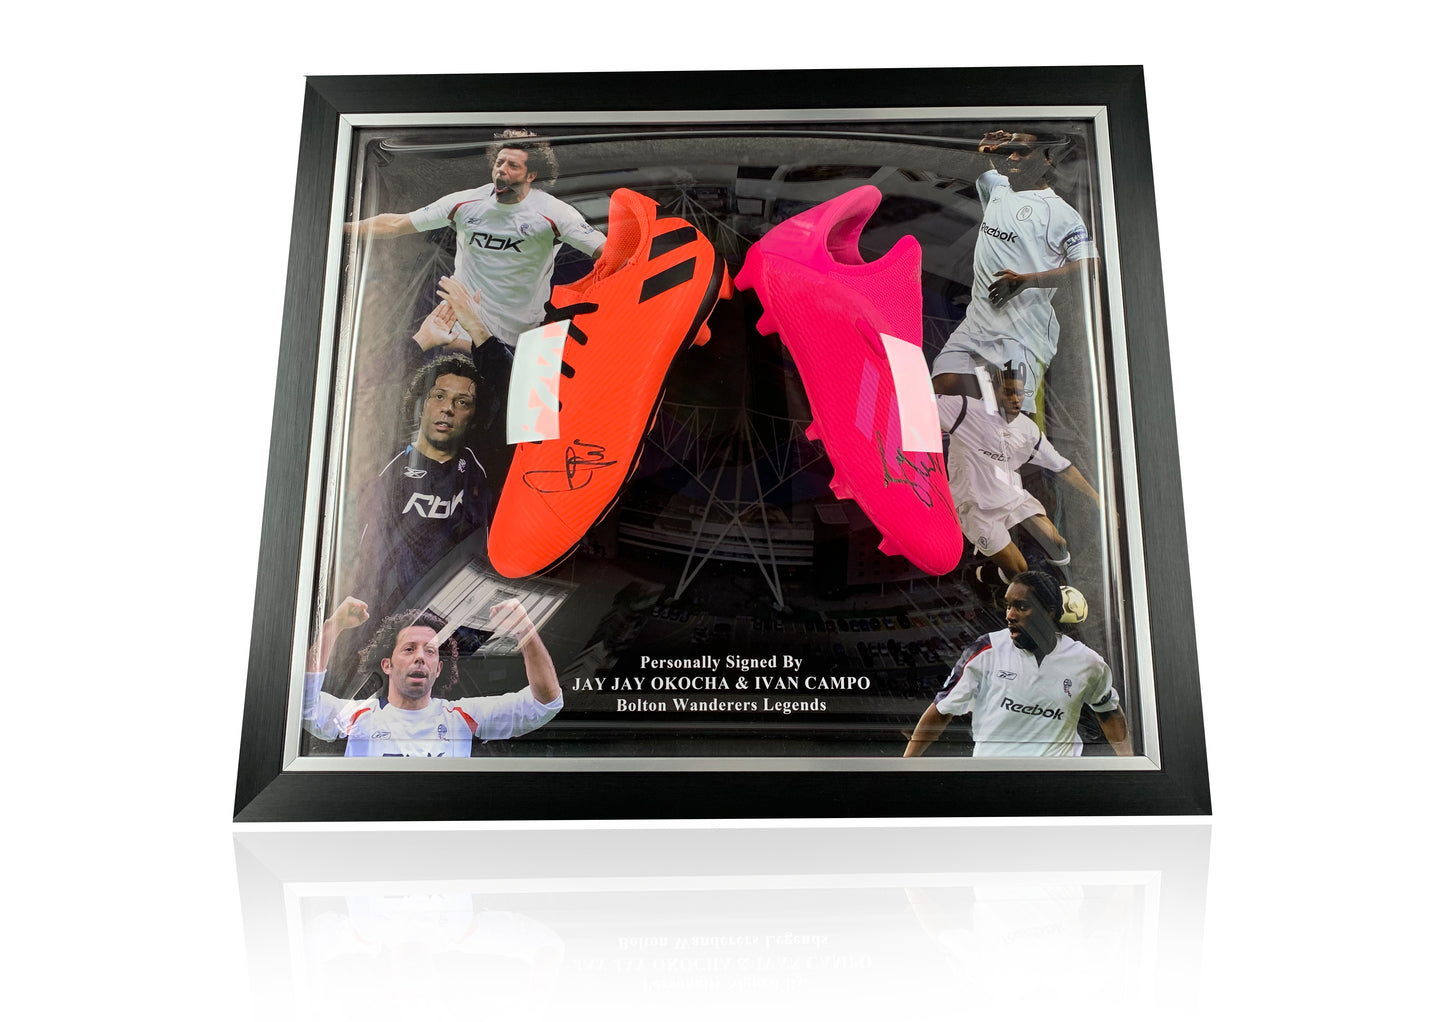 Jay Jay Okocha & Ivan Campo Bolton Wanderers double boot deluxe signed framed bubble montage